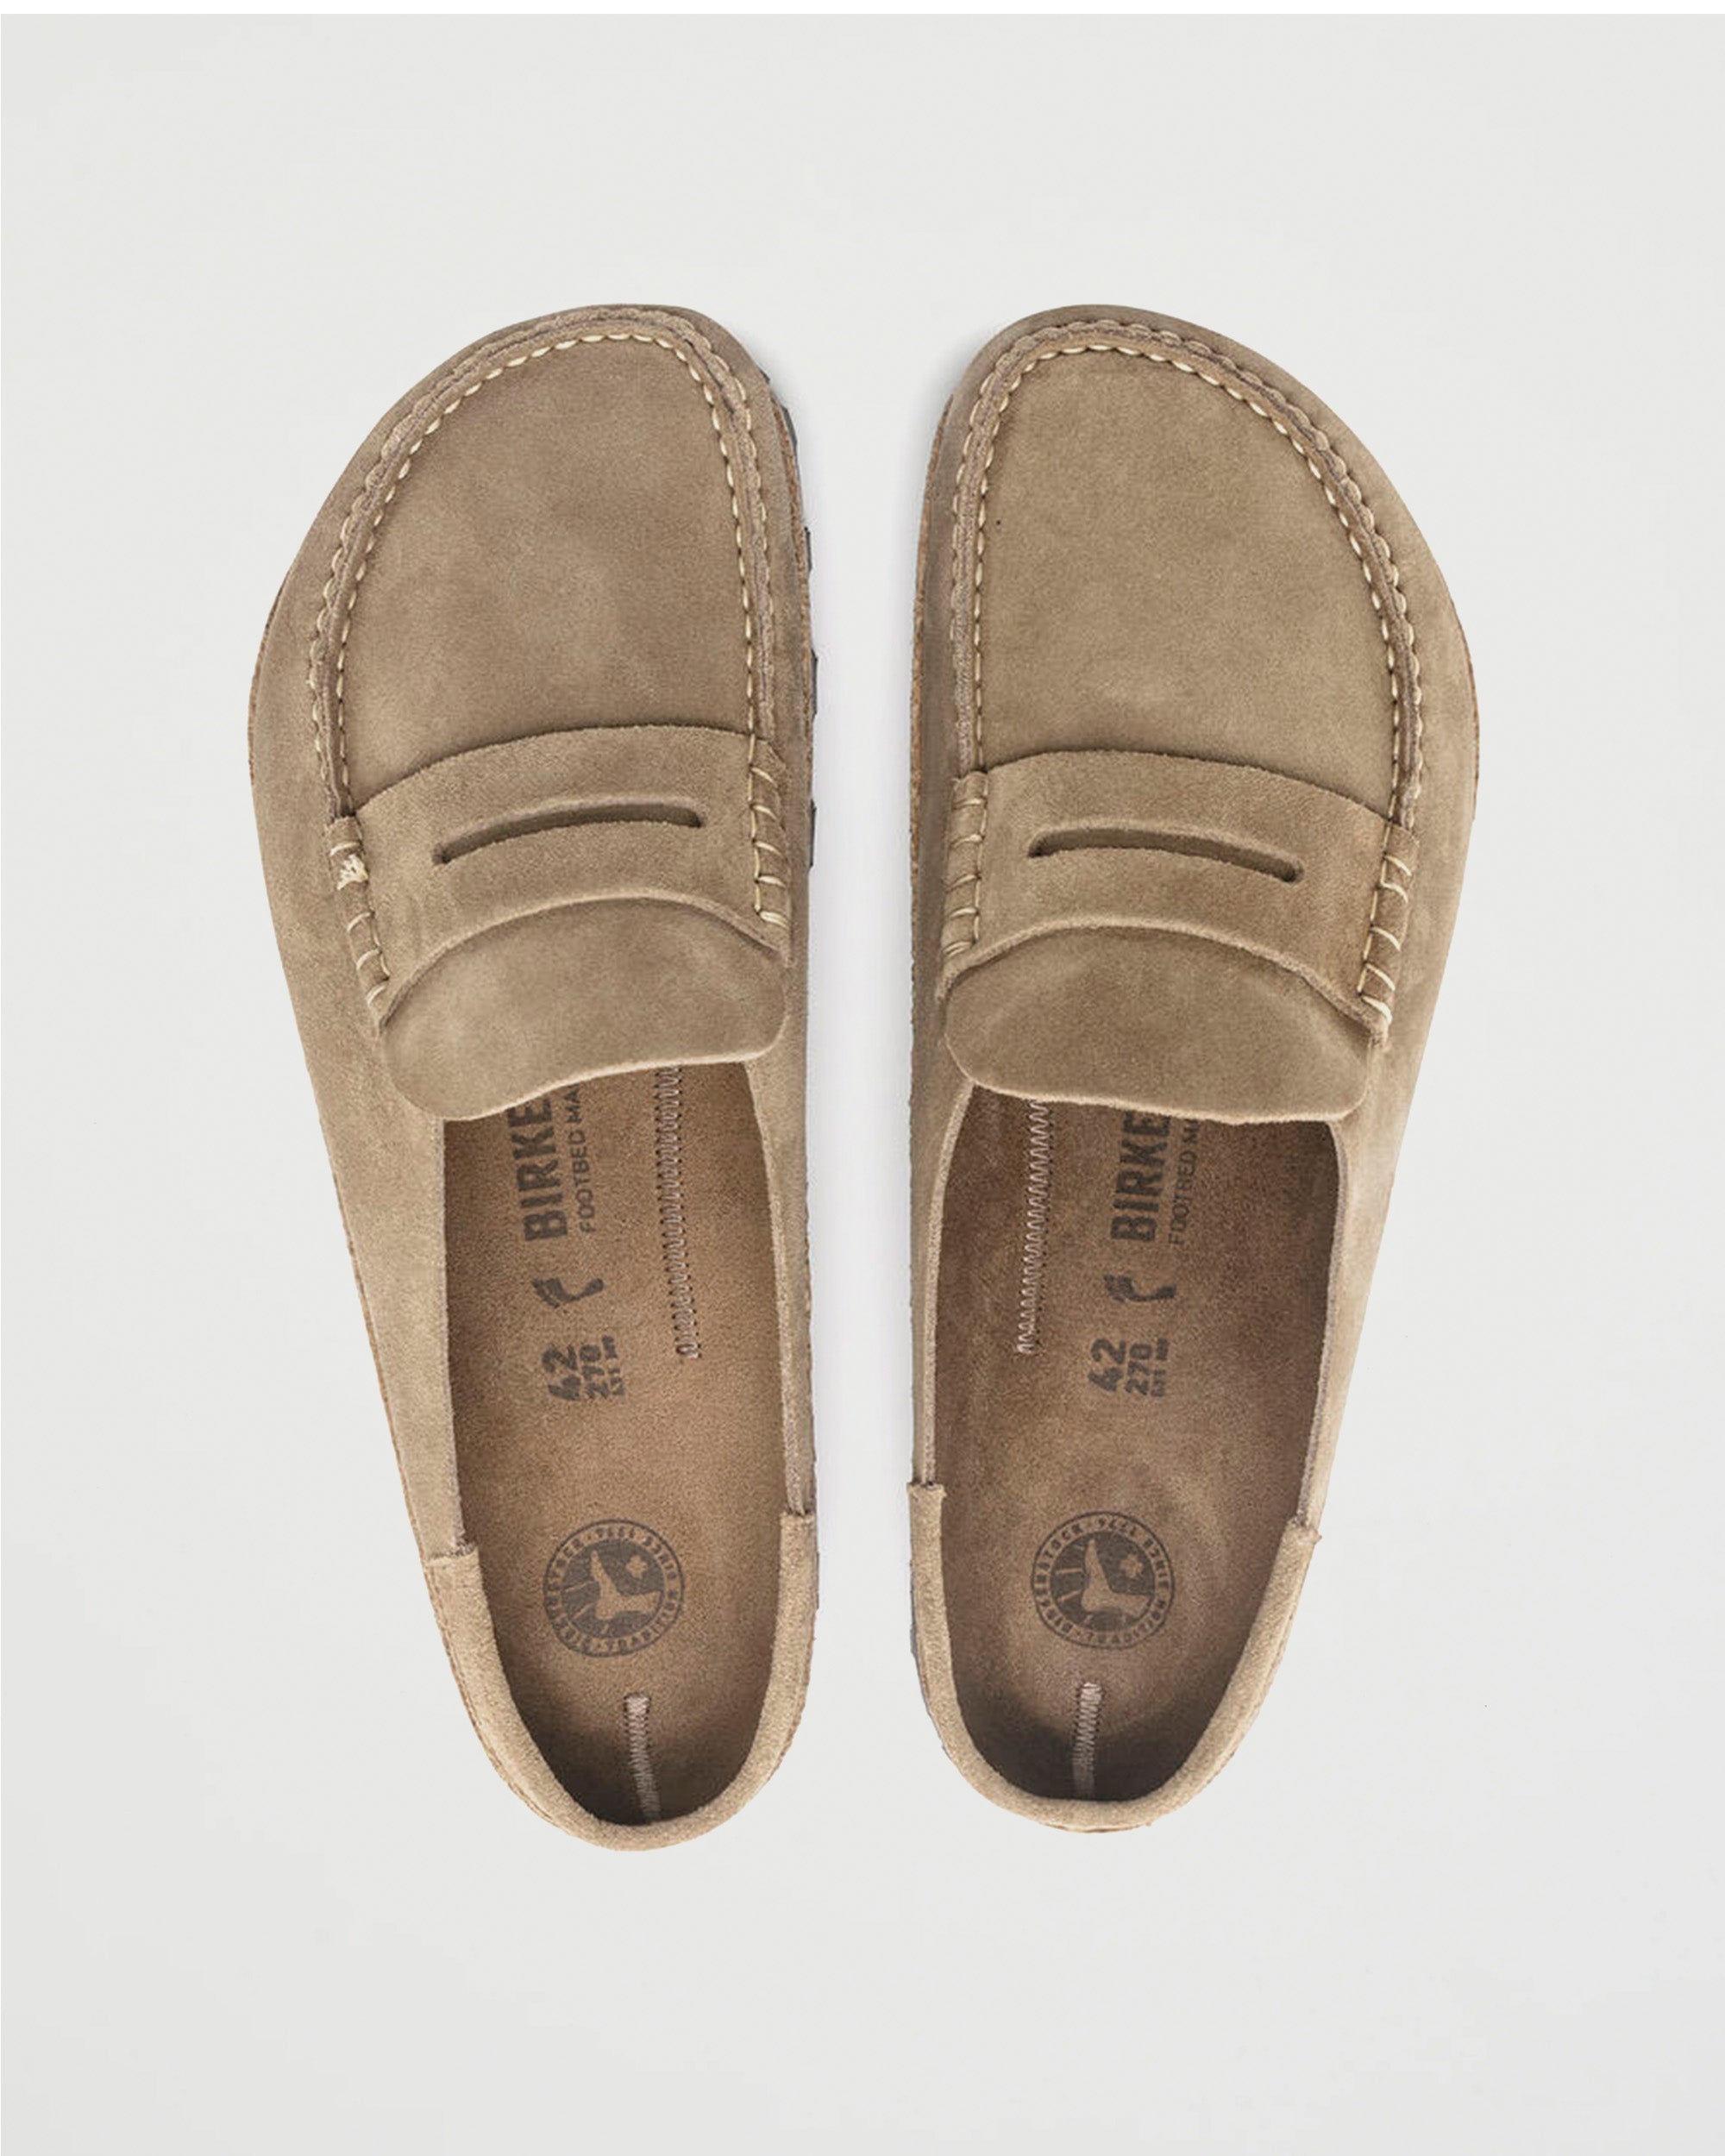 Birkenstock Naples Taupe Shoes Leather Unisex